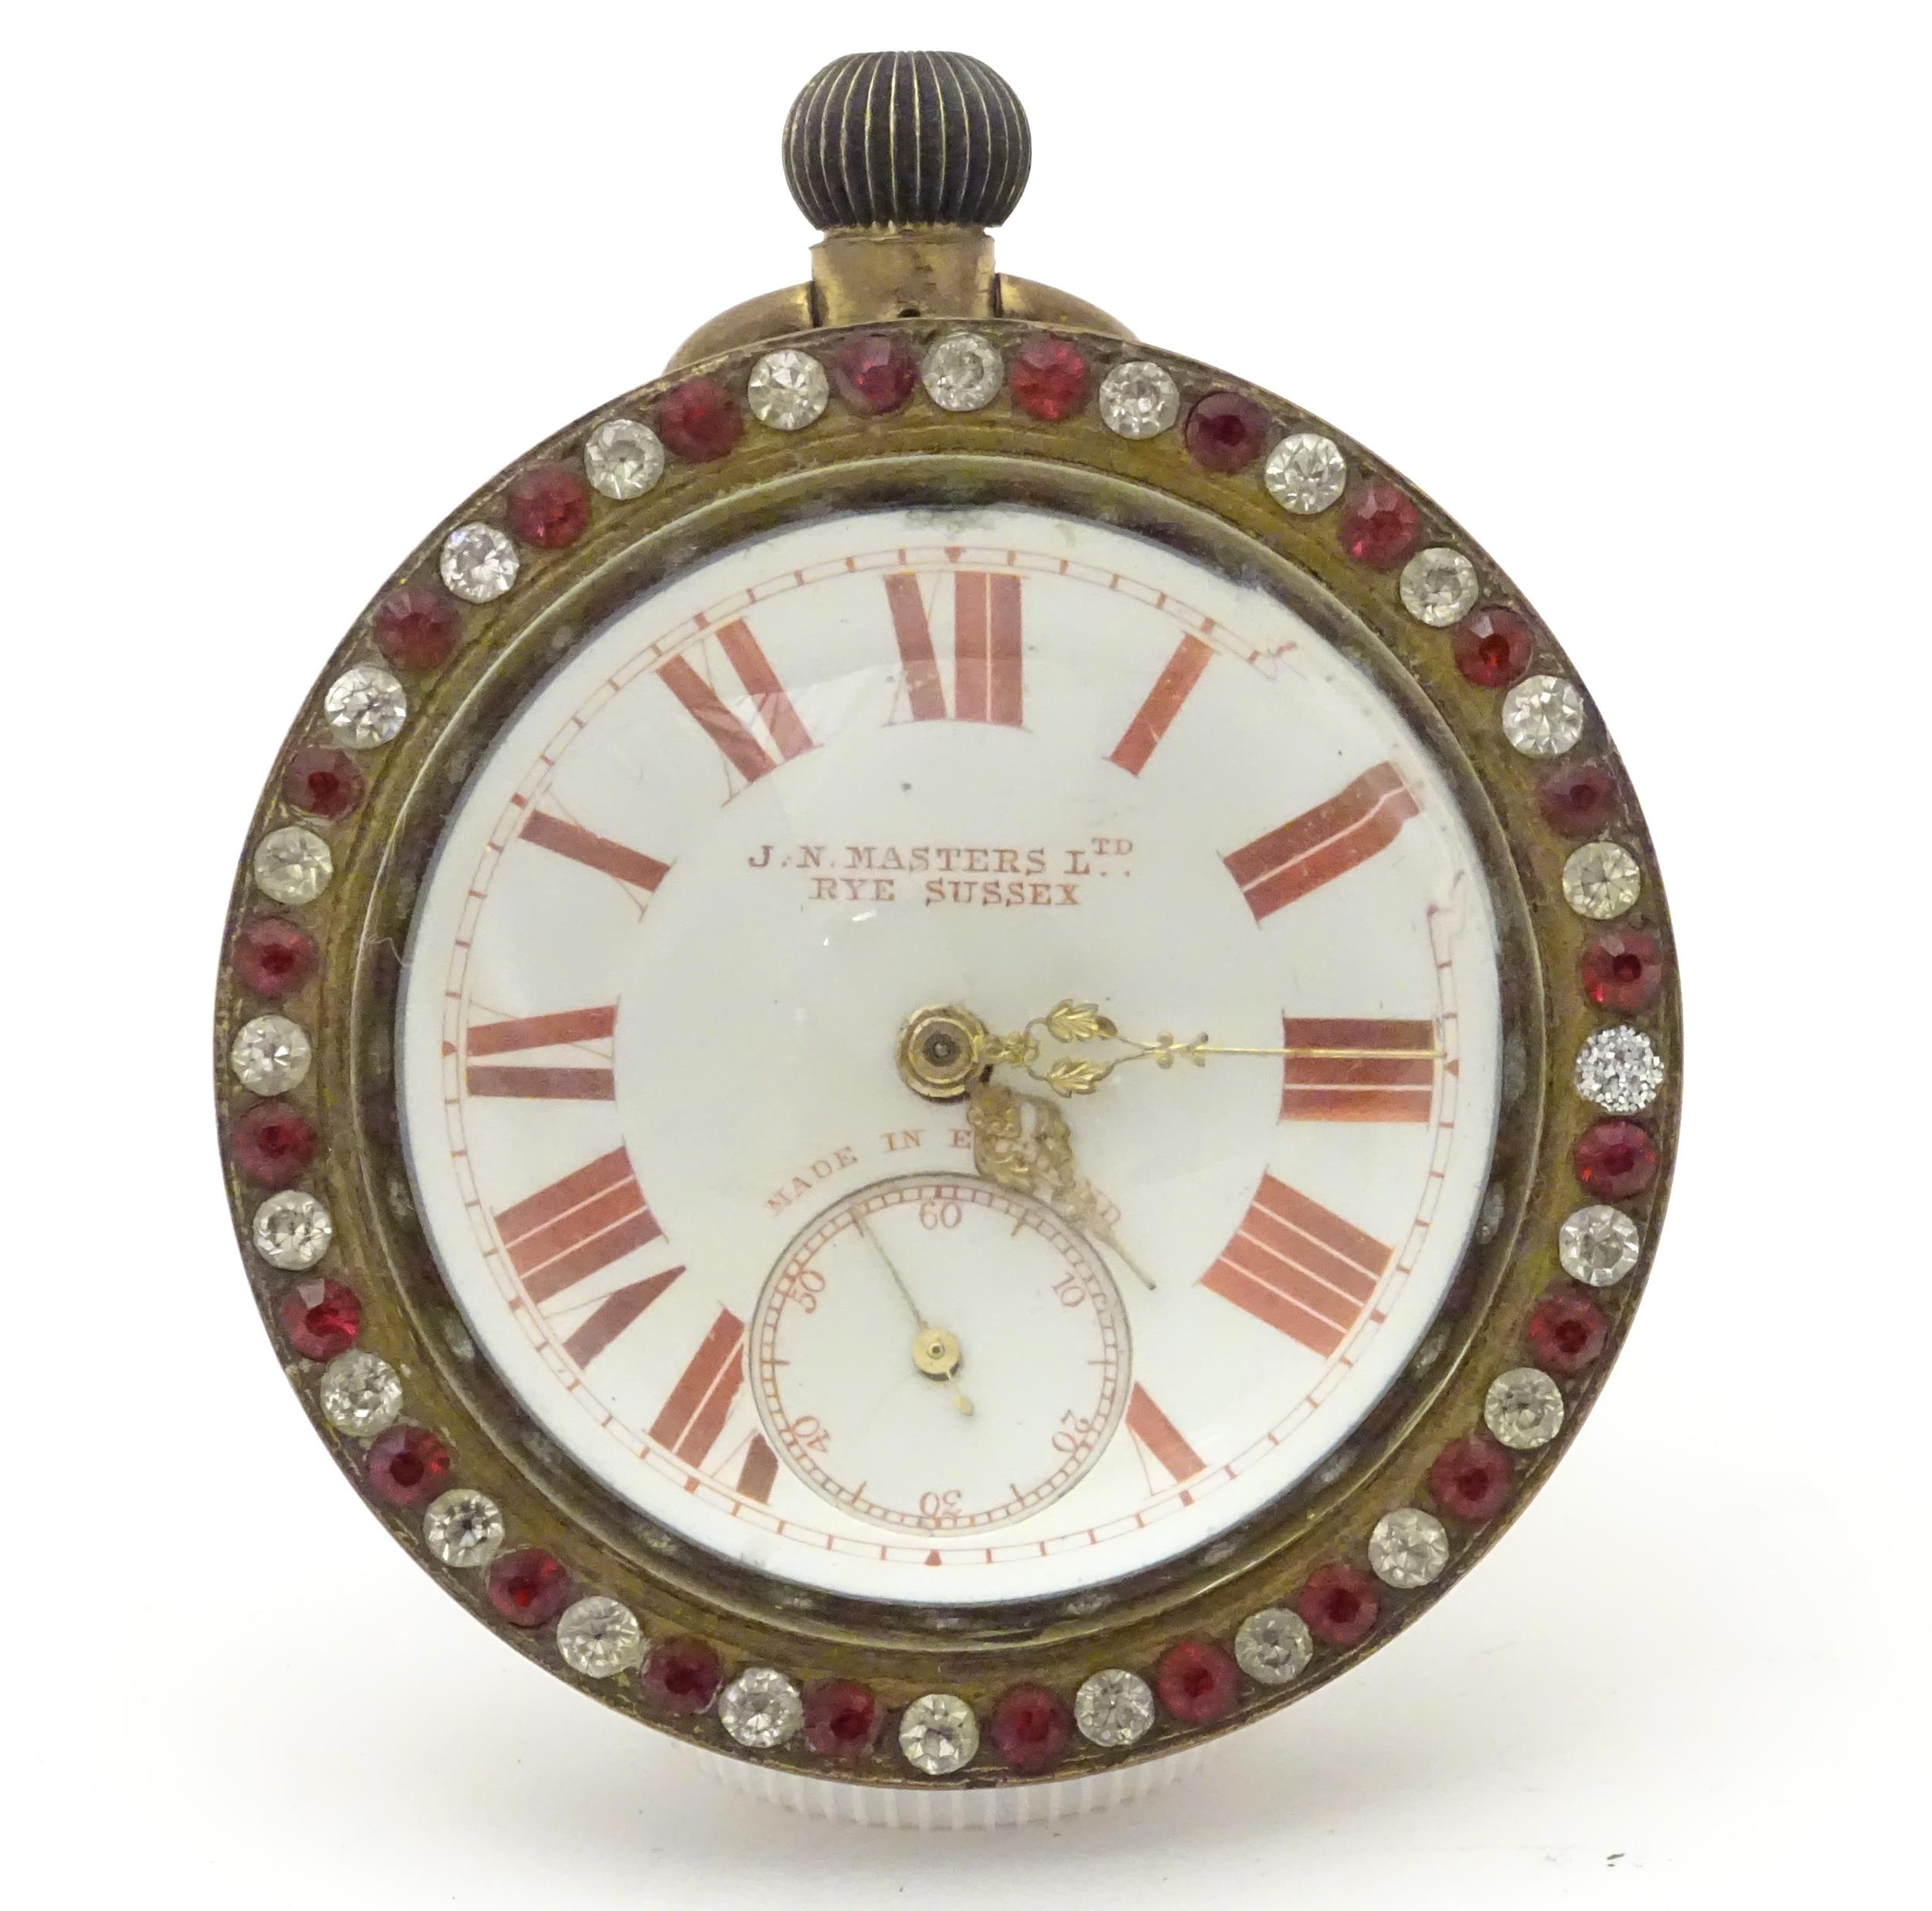 A bulls eye pocket / desk watch, the dial signed J. N Masters Ltd. Rye Sussex the surround decorated - Image 3 of 11